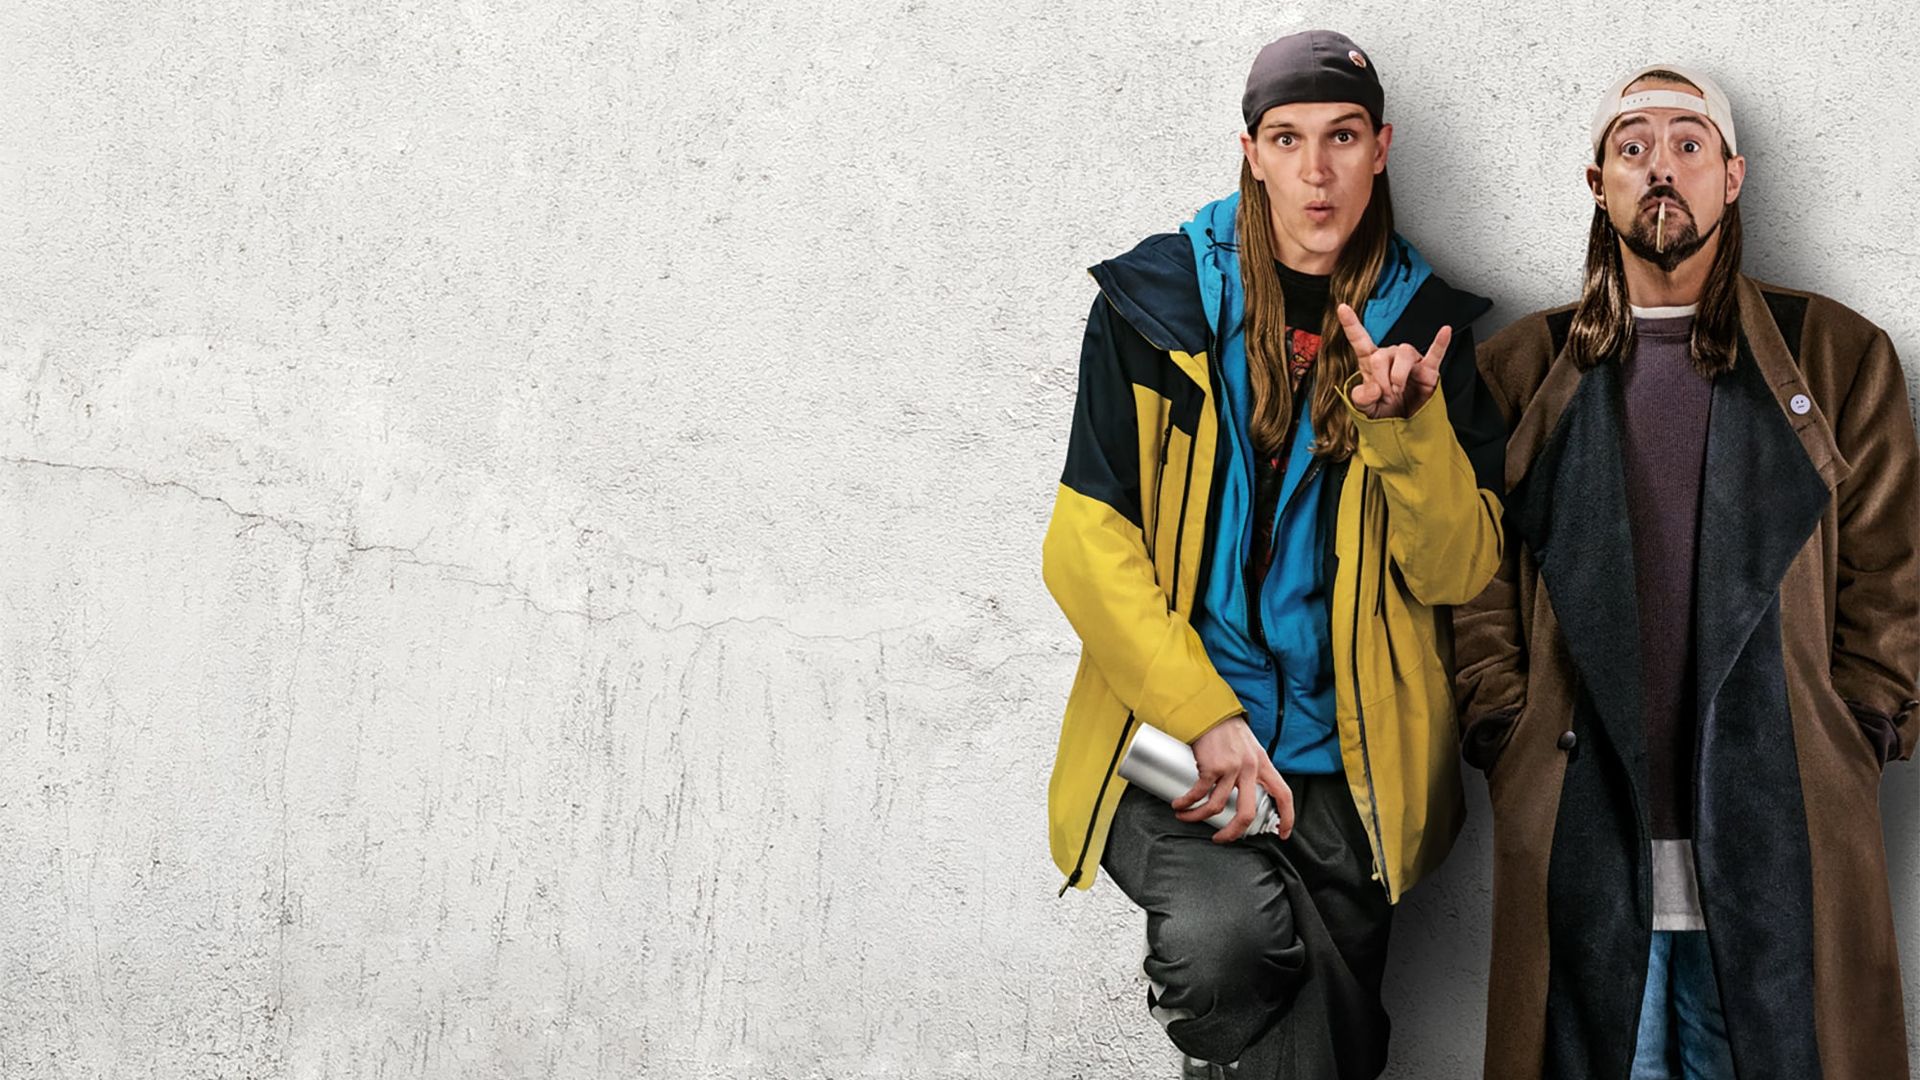 Jay and Silent Bob Reboot background